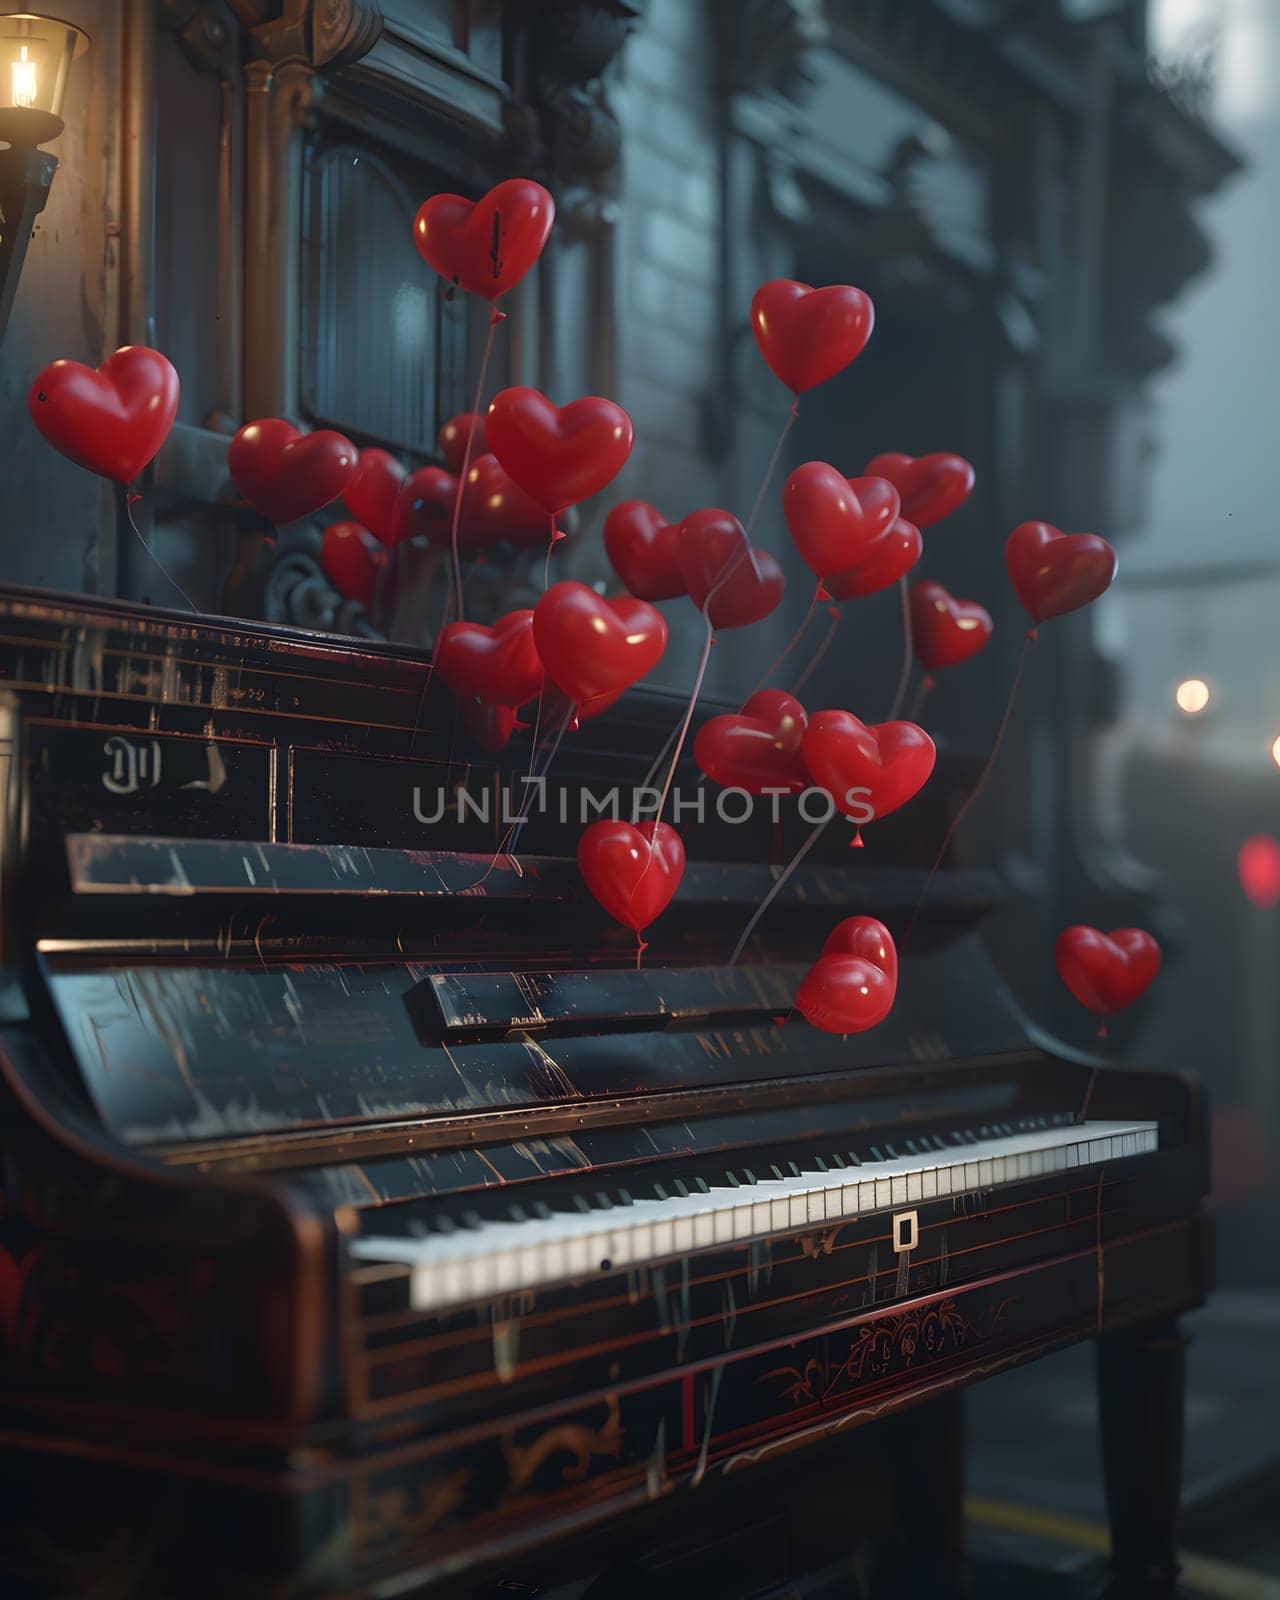 A piano adorned with heartshaped balloon flowers, creating a whimsical and romantic atmosphere. The musical instrument stands out against the building backdrop, with petals floating in the sky